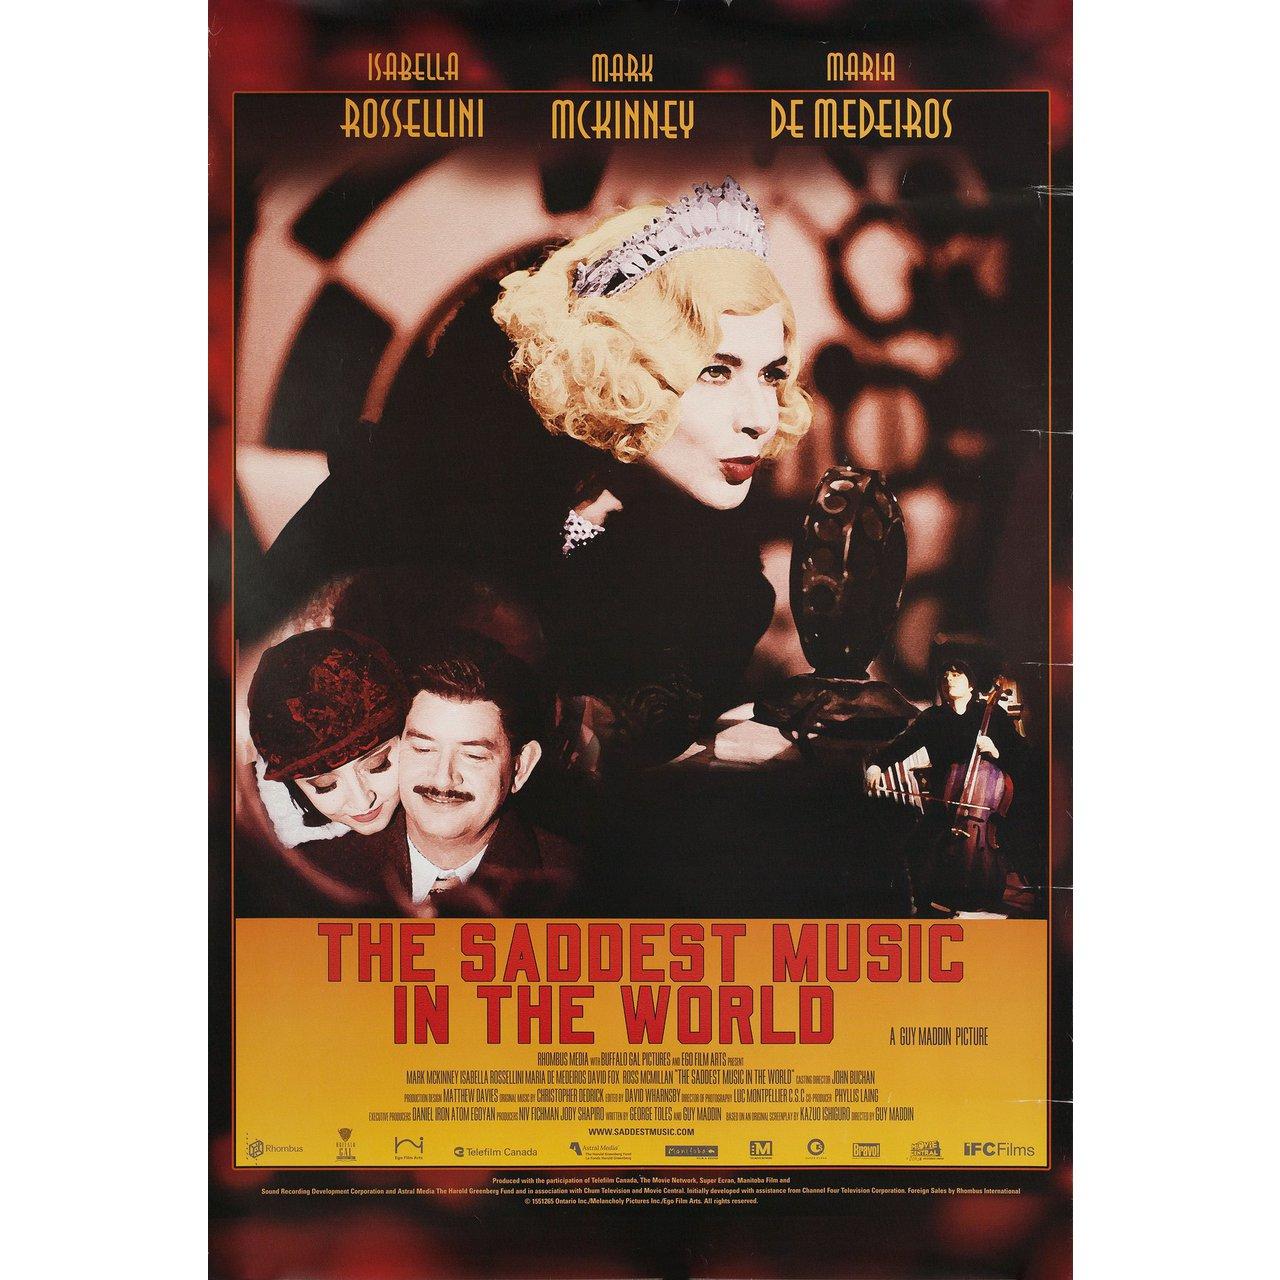 Original 2003 U.S. one sheet poster for the film The Saddest Music in the World directed by Guy Maddin with Mark McKinney / Isabella Rossellini / Maria de Medeiros / David Fox. Very Good condition, rolled with edge & handling wear. Please note: the